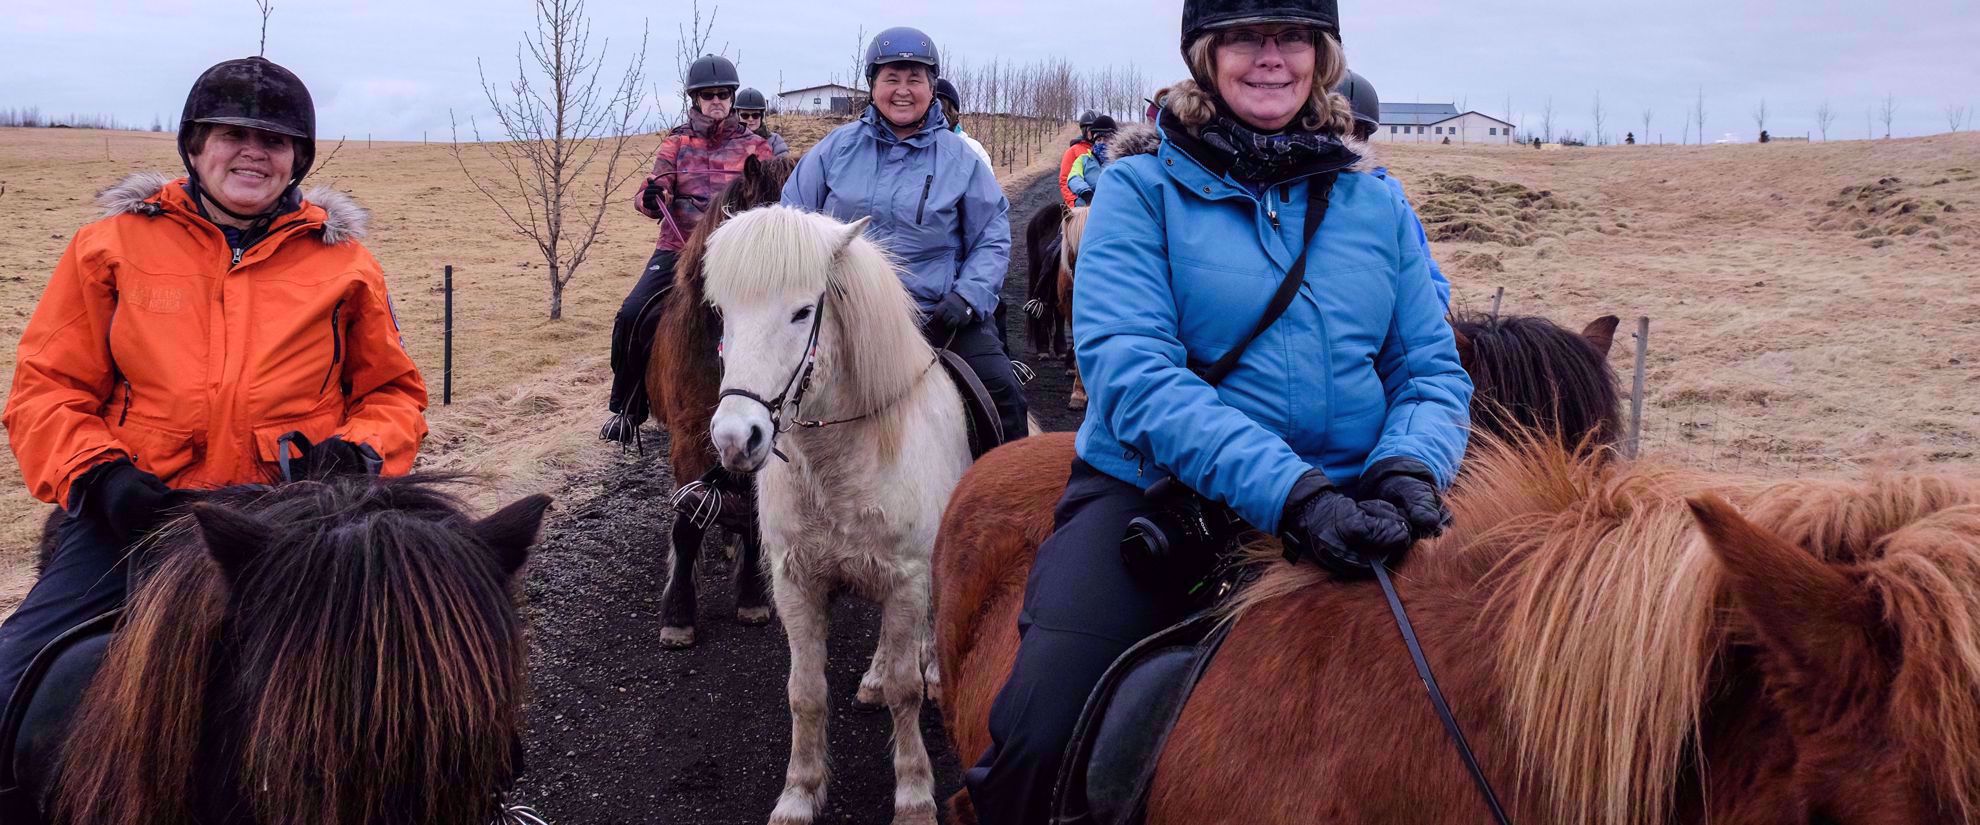 women's travel group riding ponies in iceland